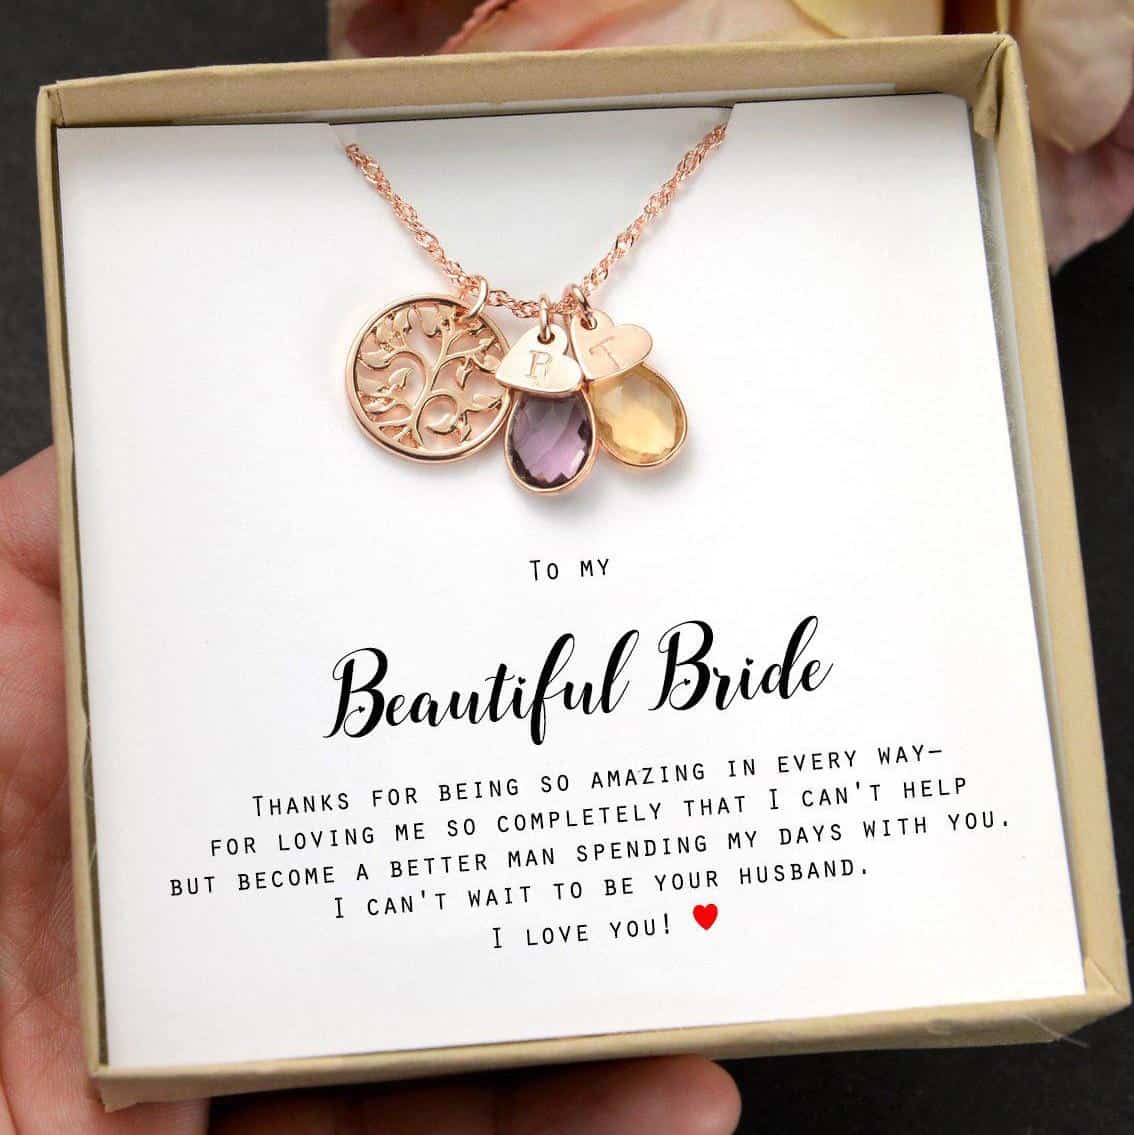 Wedding Day Gift For Bride From Groom To My Bride Gift From Groom Groom To Future Wife Gift Wedding Day From Groom To Bride